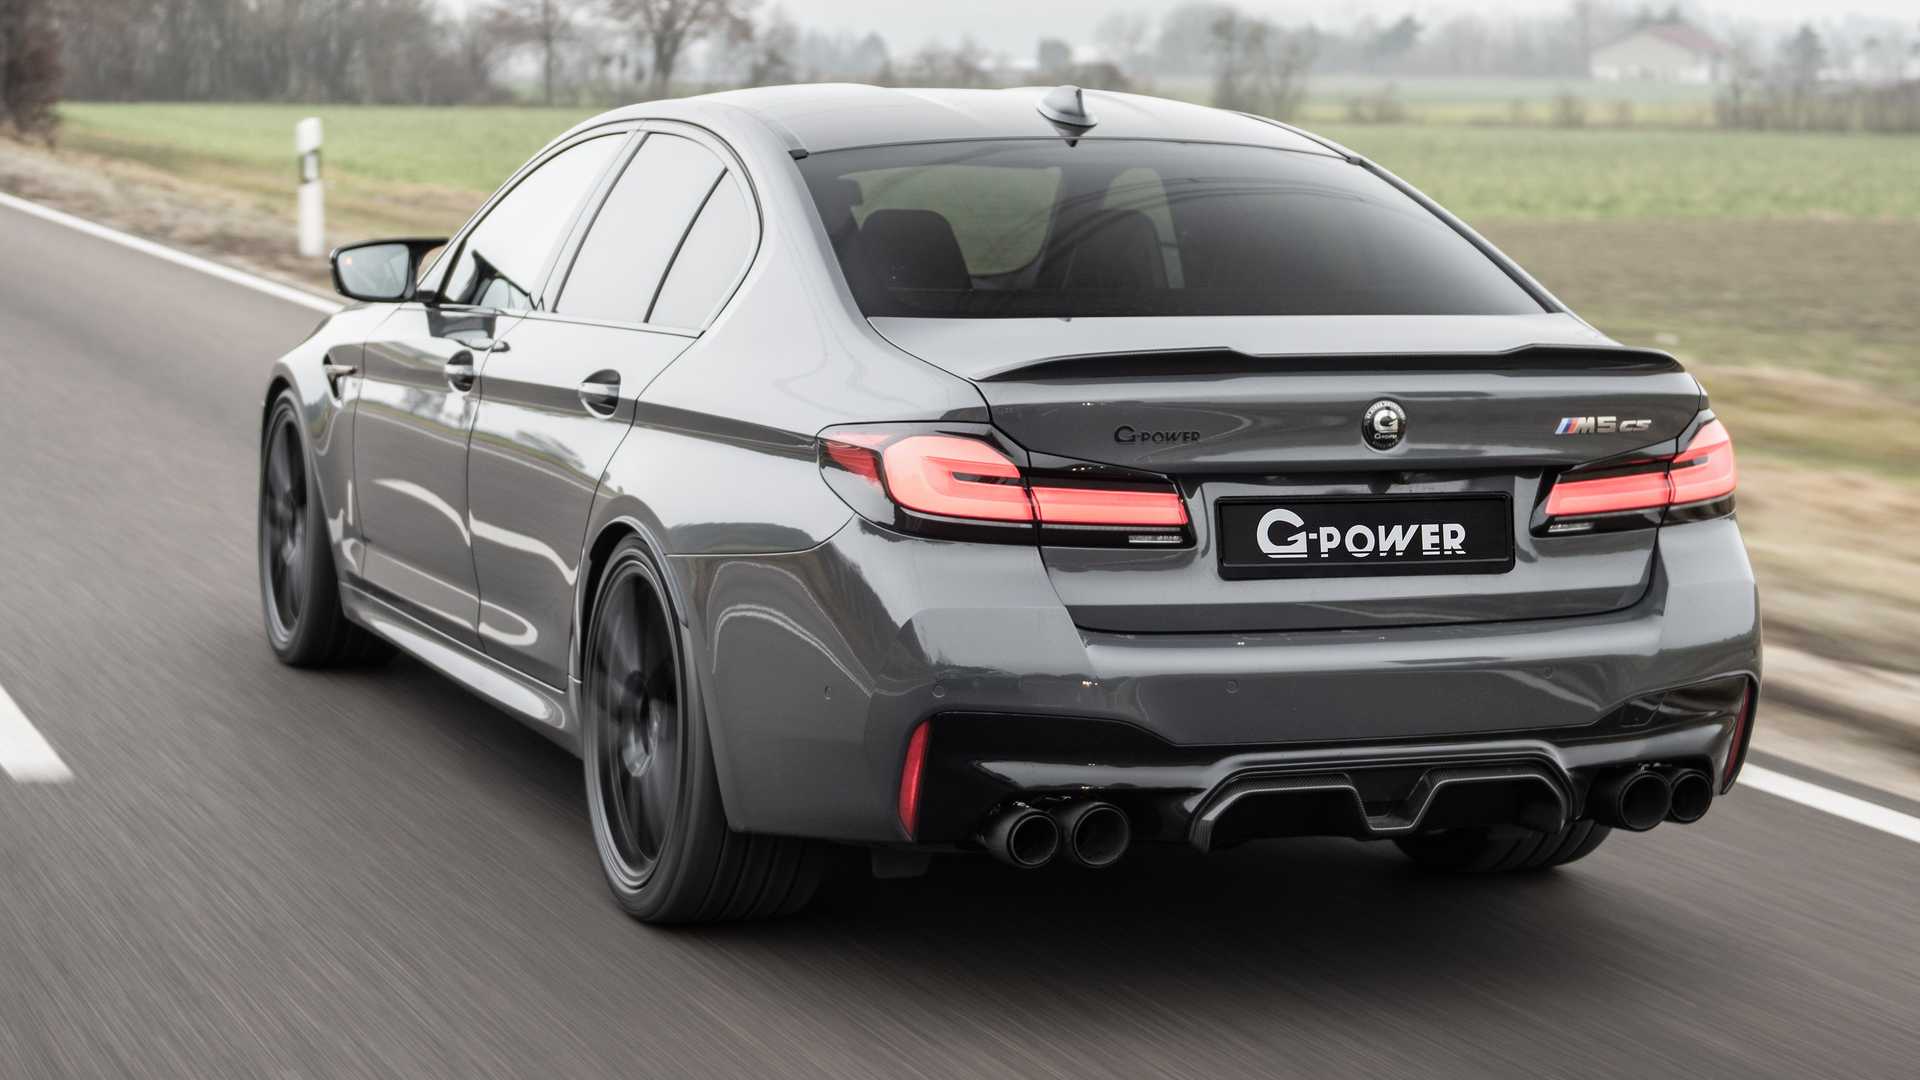 The BMW M5 CS from G-Power with 900 hp supercars snack